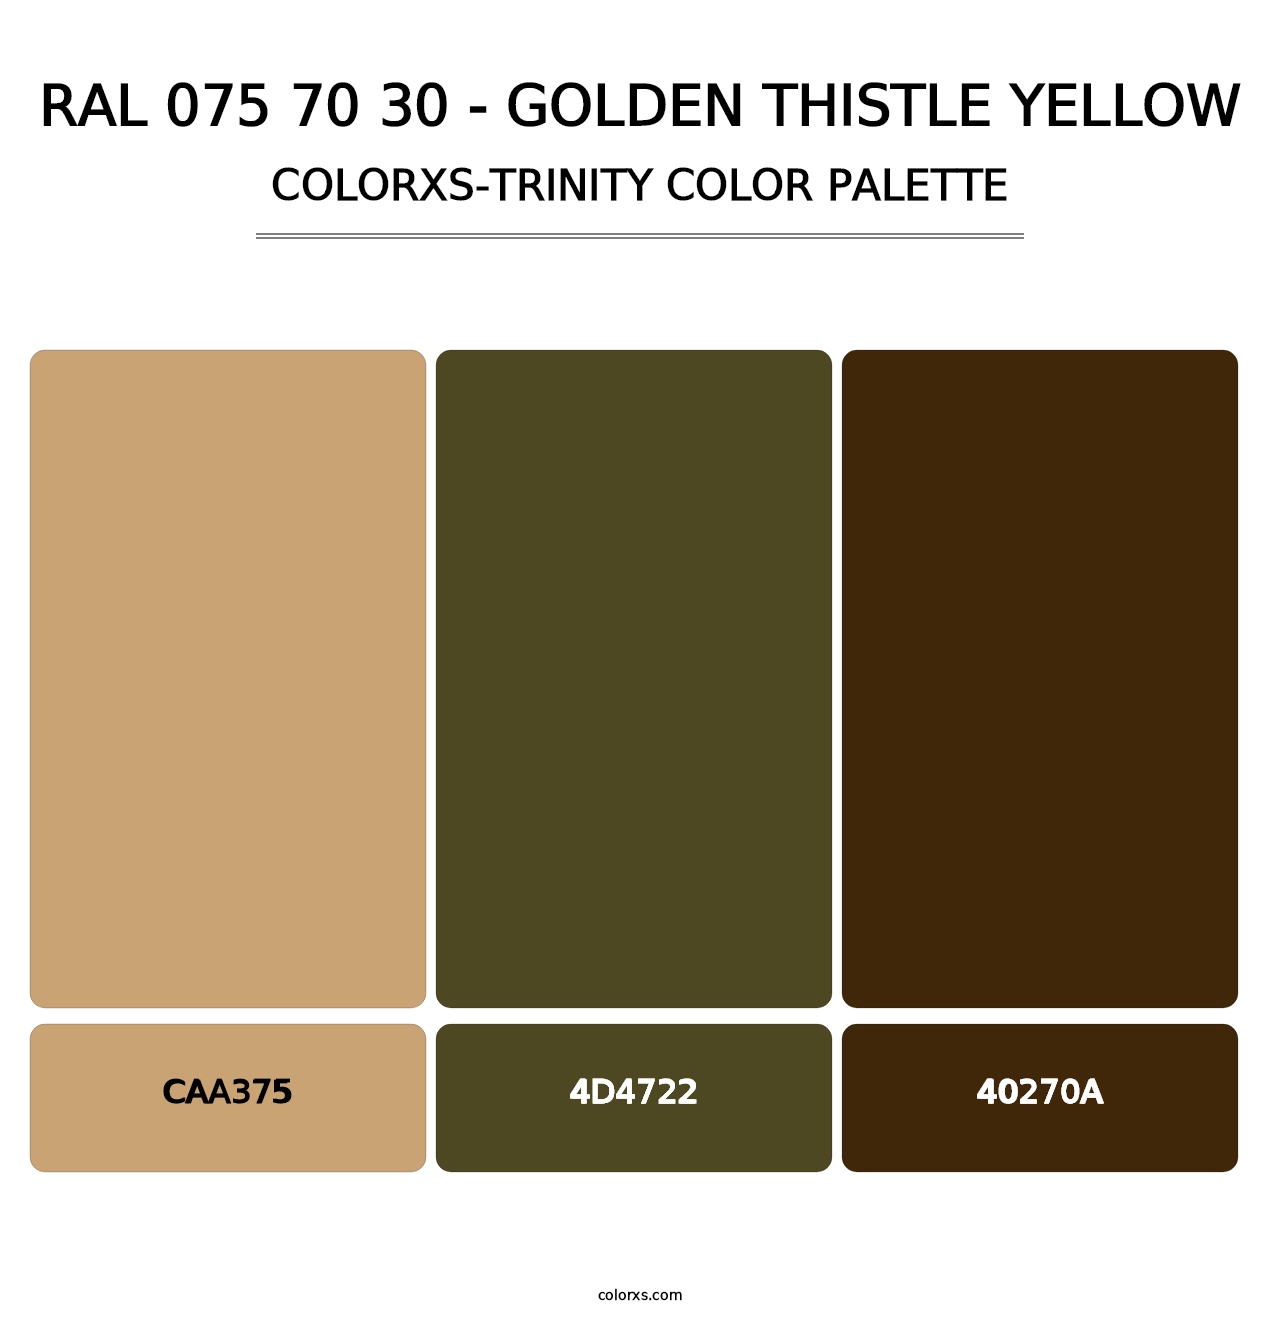 RAL 075 70 30 - Golden Thistle Yellow - Colorxs Trinity Palette